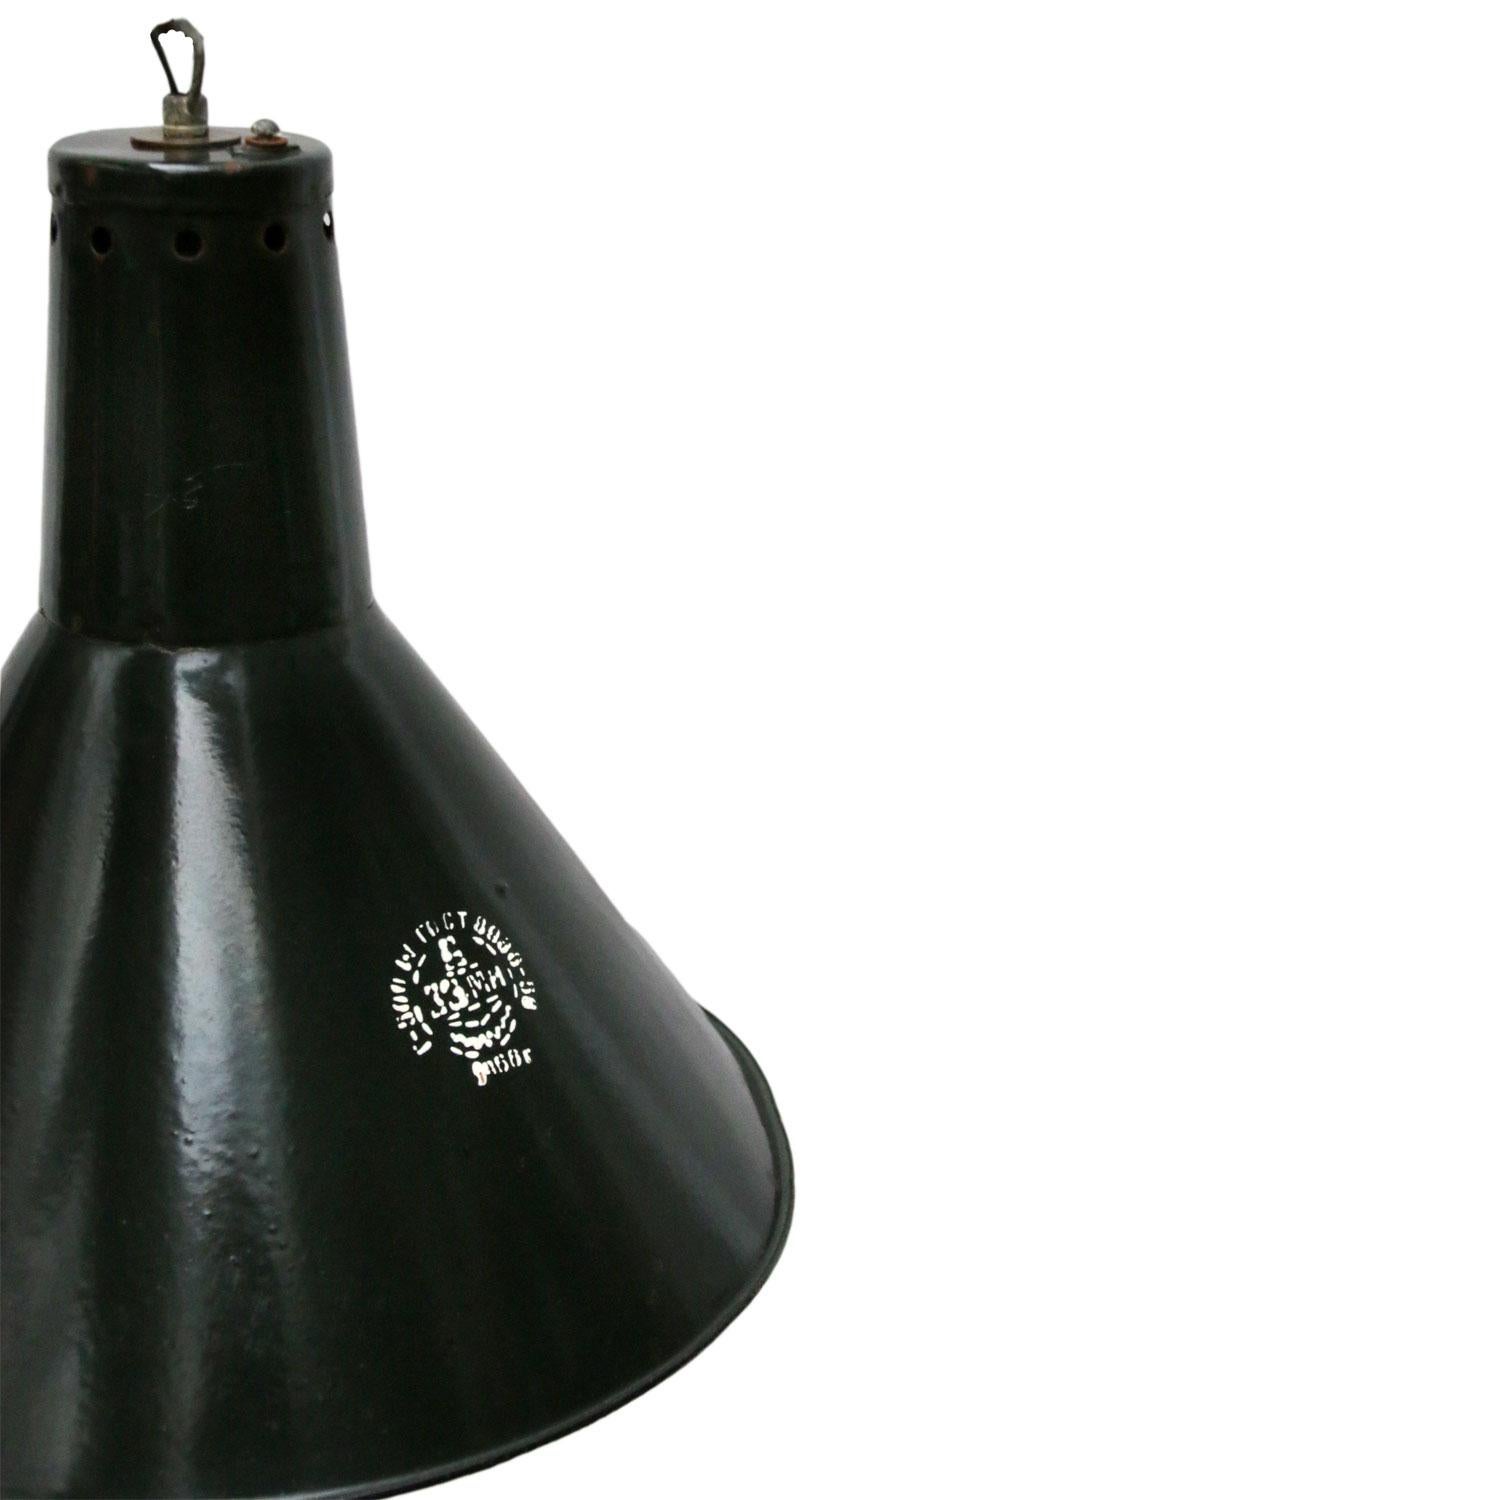 Dark green enamel factory pendant light.
White interior.

Weight: 2.0 kg / 4.4 lb.

Priced per individual item. All lamps have been made suitable by international standards for incandescent light bulbs, energy-efficient and LED bulbs. E26/E27